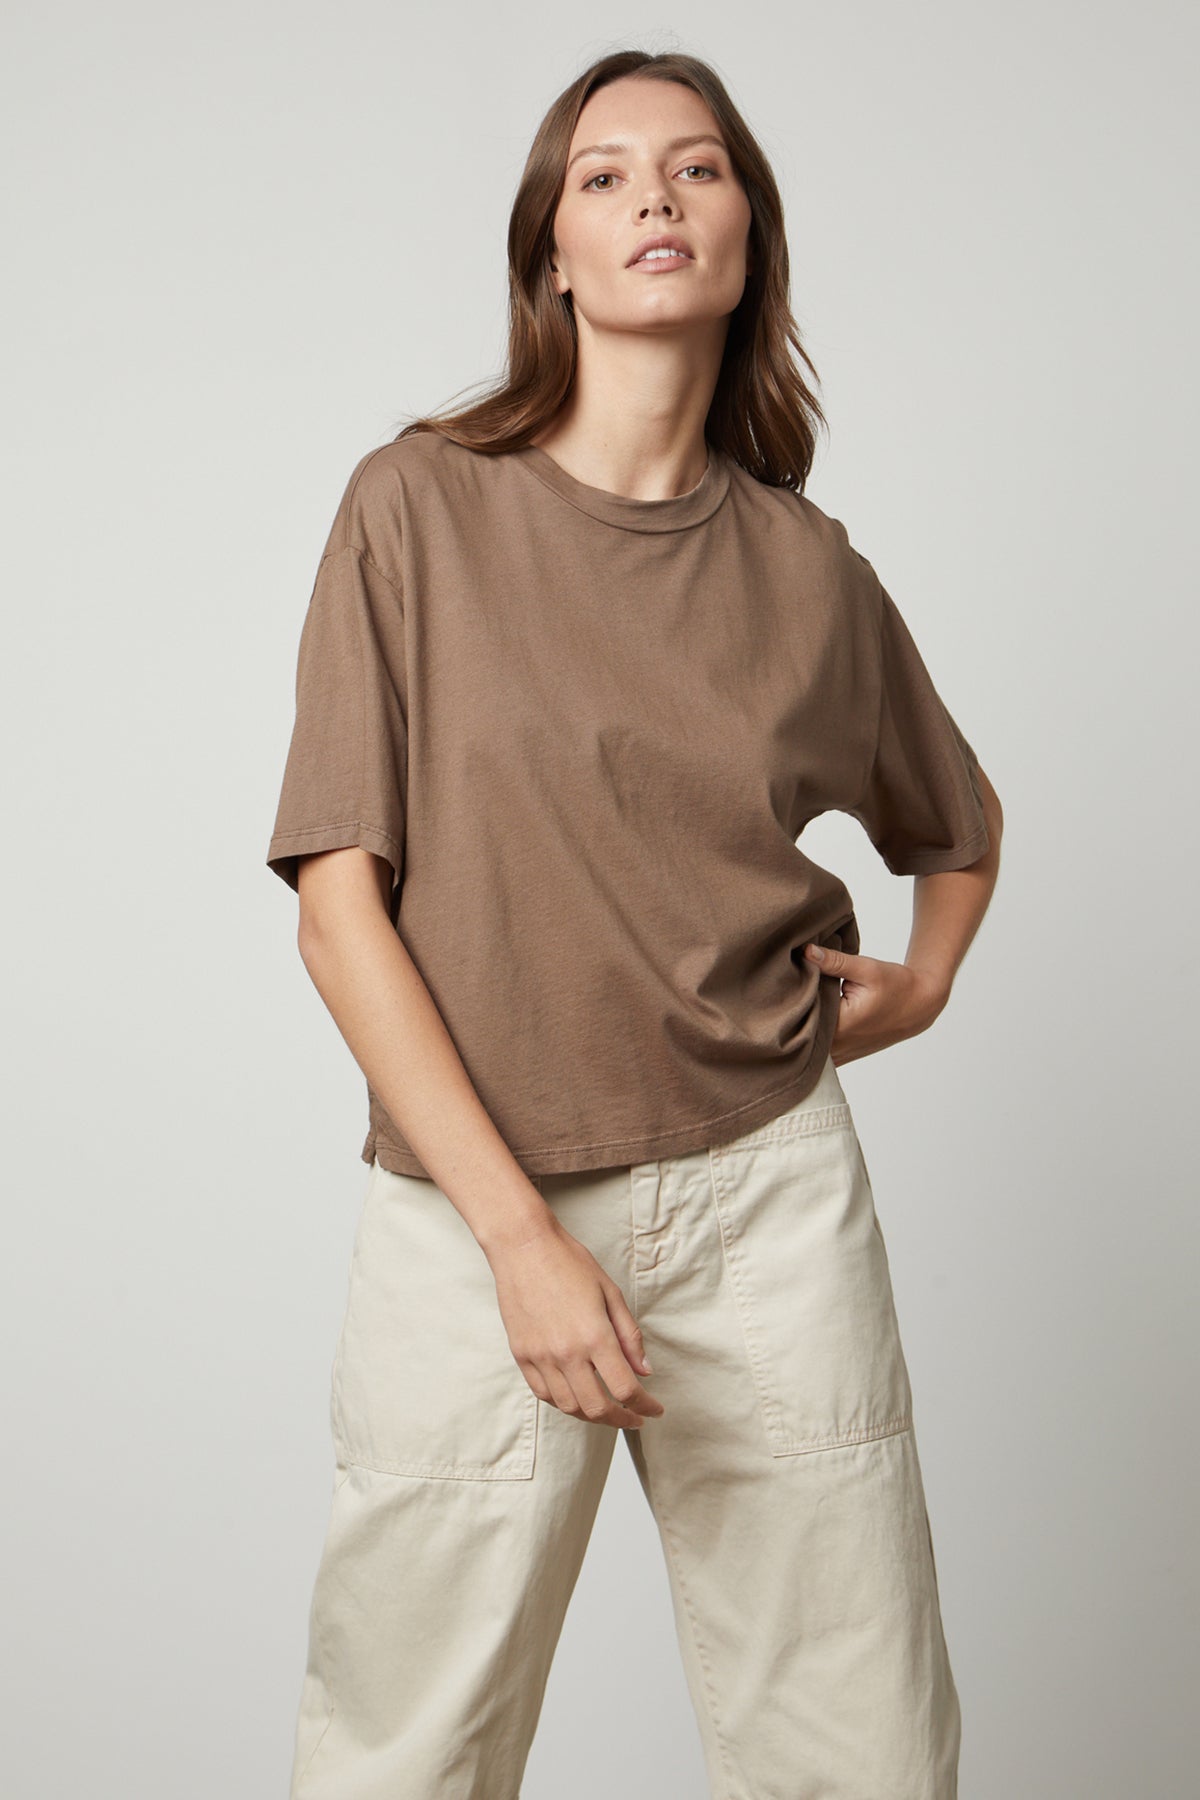 The model is wearing a Velvet by Graham & Spencer oversized fit brown CLARAH CREW NECK TEE shirt and beige pants, styled with sueded jersey fabric.-35655921107137